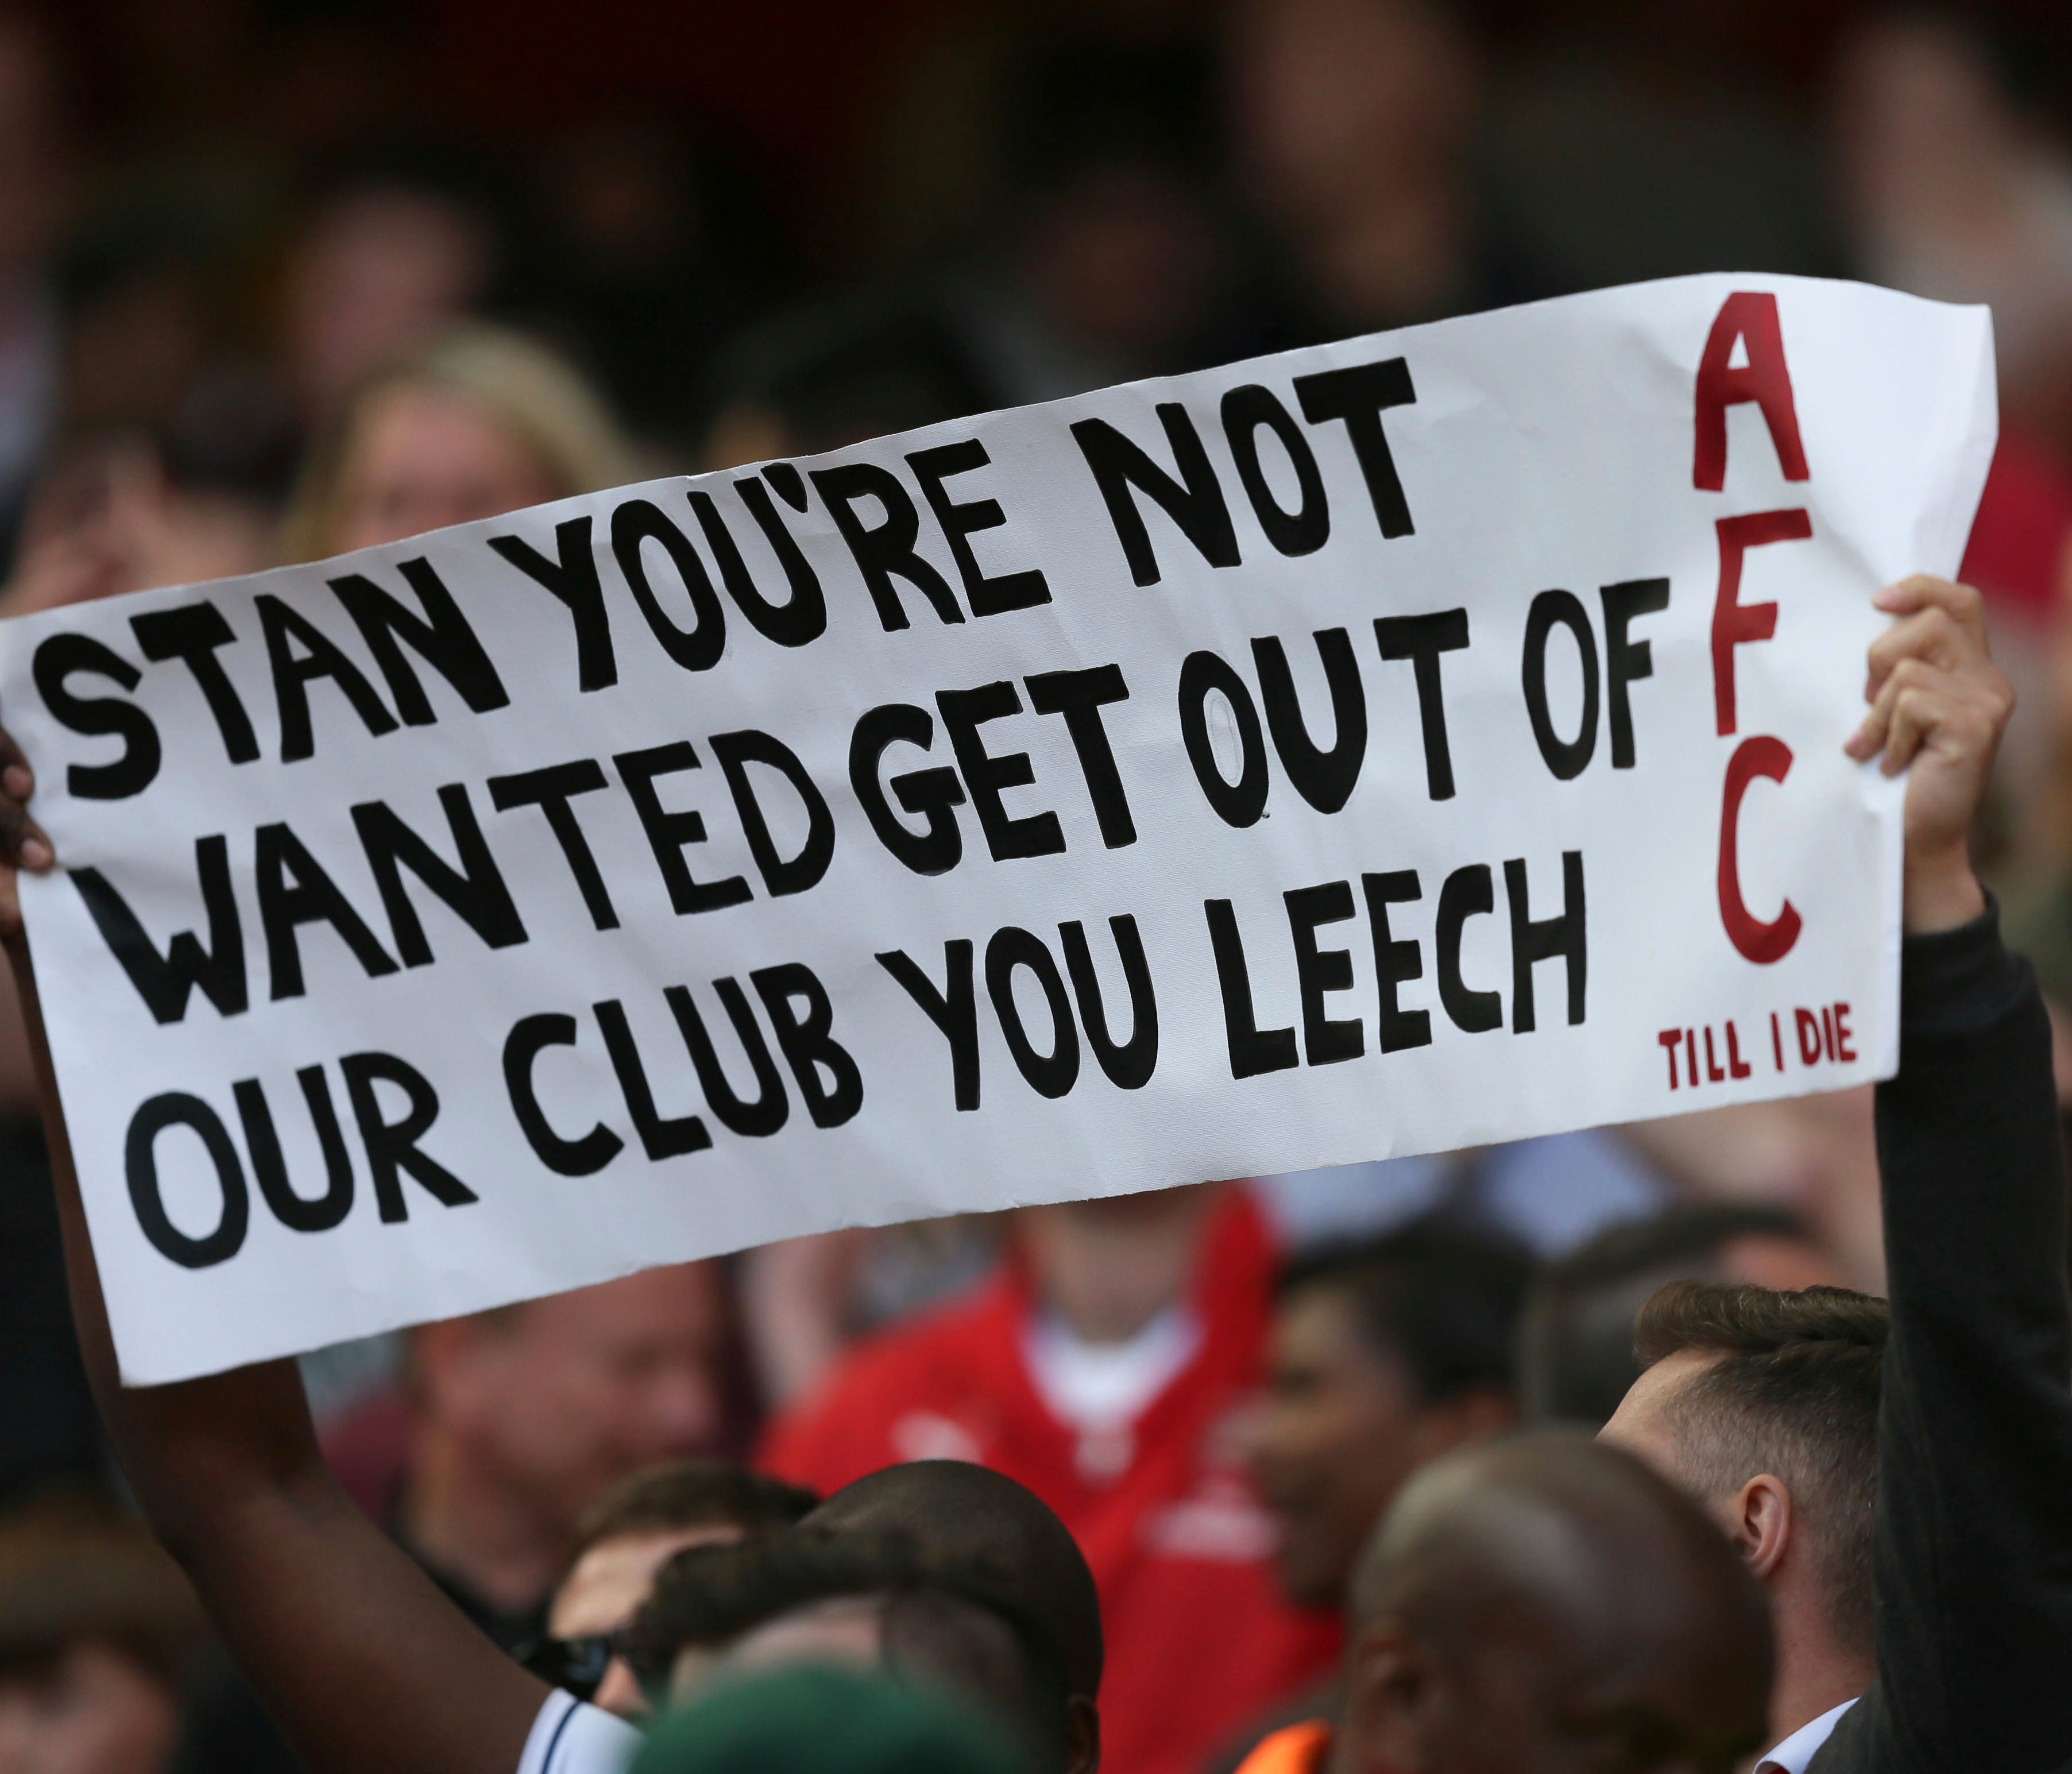 An Arsenal fan holds up a protest banner in reference to Arsenal majority owner Stan Kroenke, during the English Premier League soccer match between Arsenal and Everton at The Emirates stadium in London, Sunday May 21, 2017. (AP Photo/Tim Ireland)